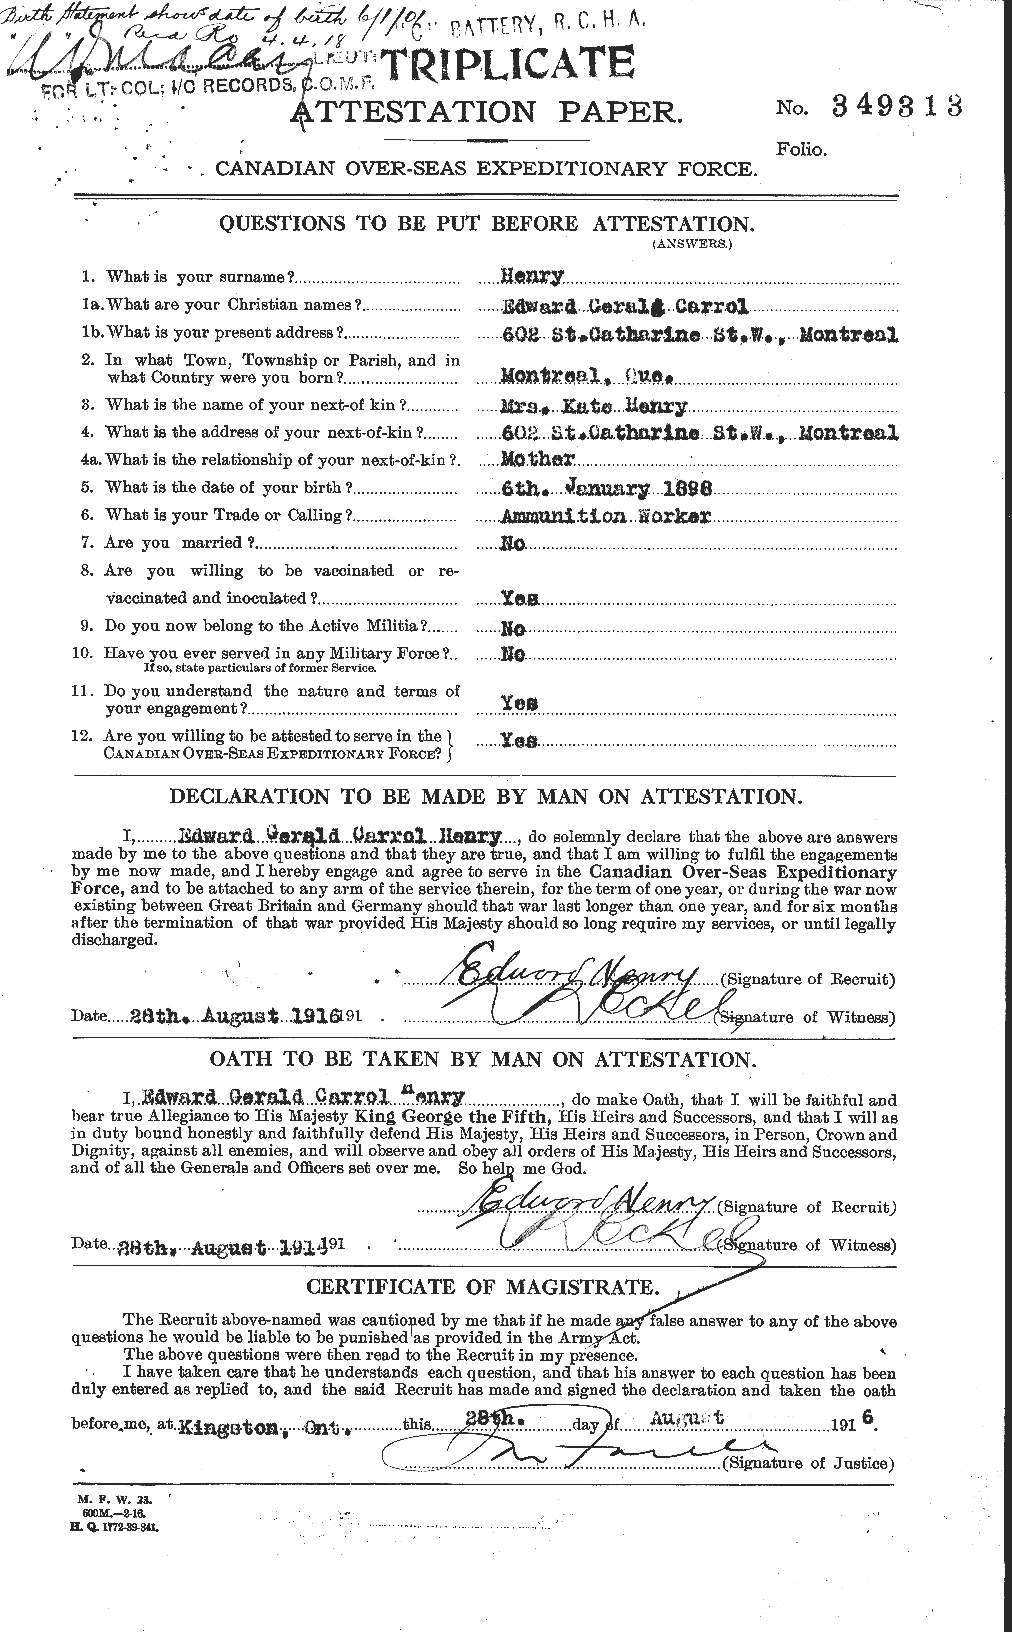 Personnel Records of the First World War - CEF 392836a